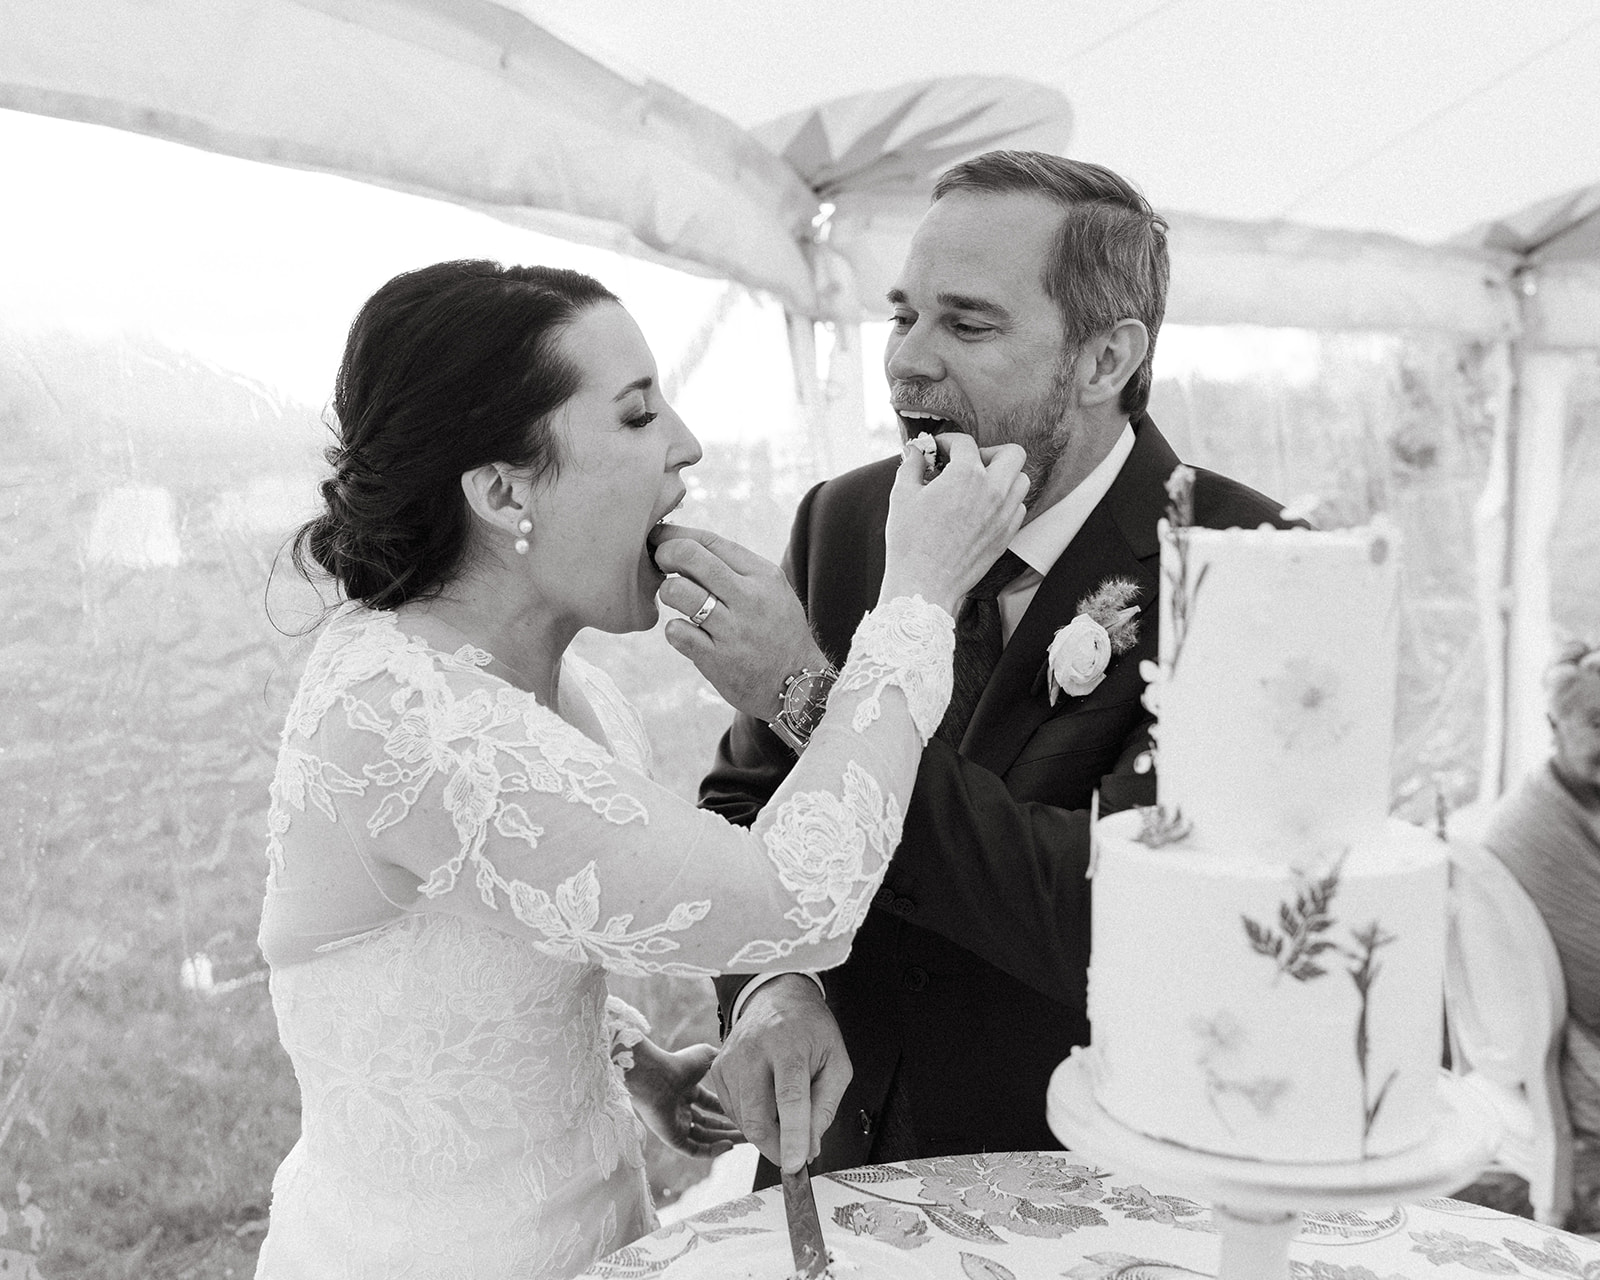 A bride and groom share a piece of cake during their cake-cutting at their ranch reception in Wyoming.